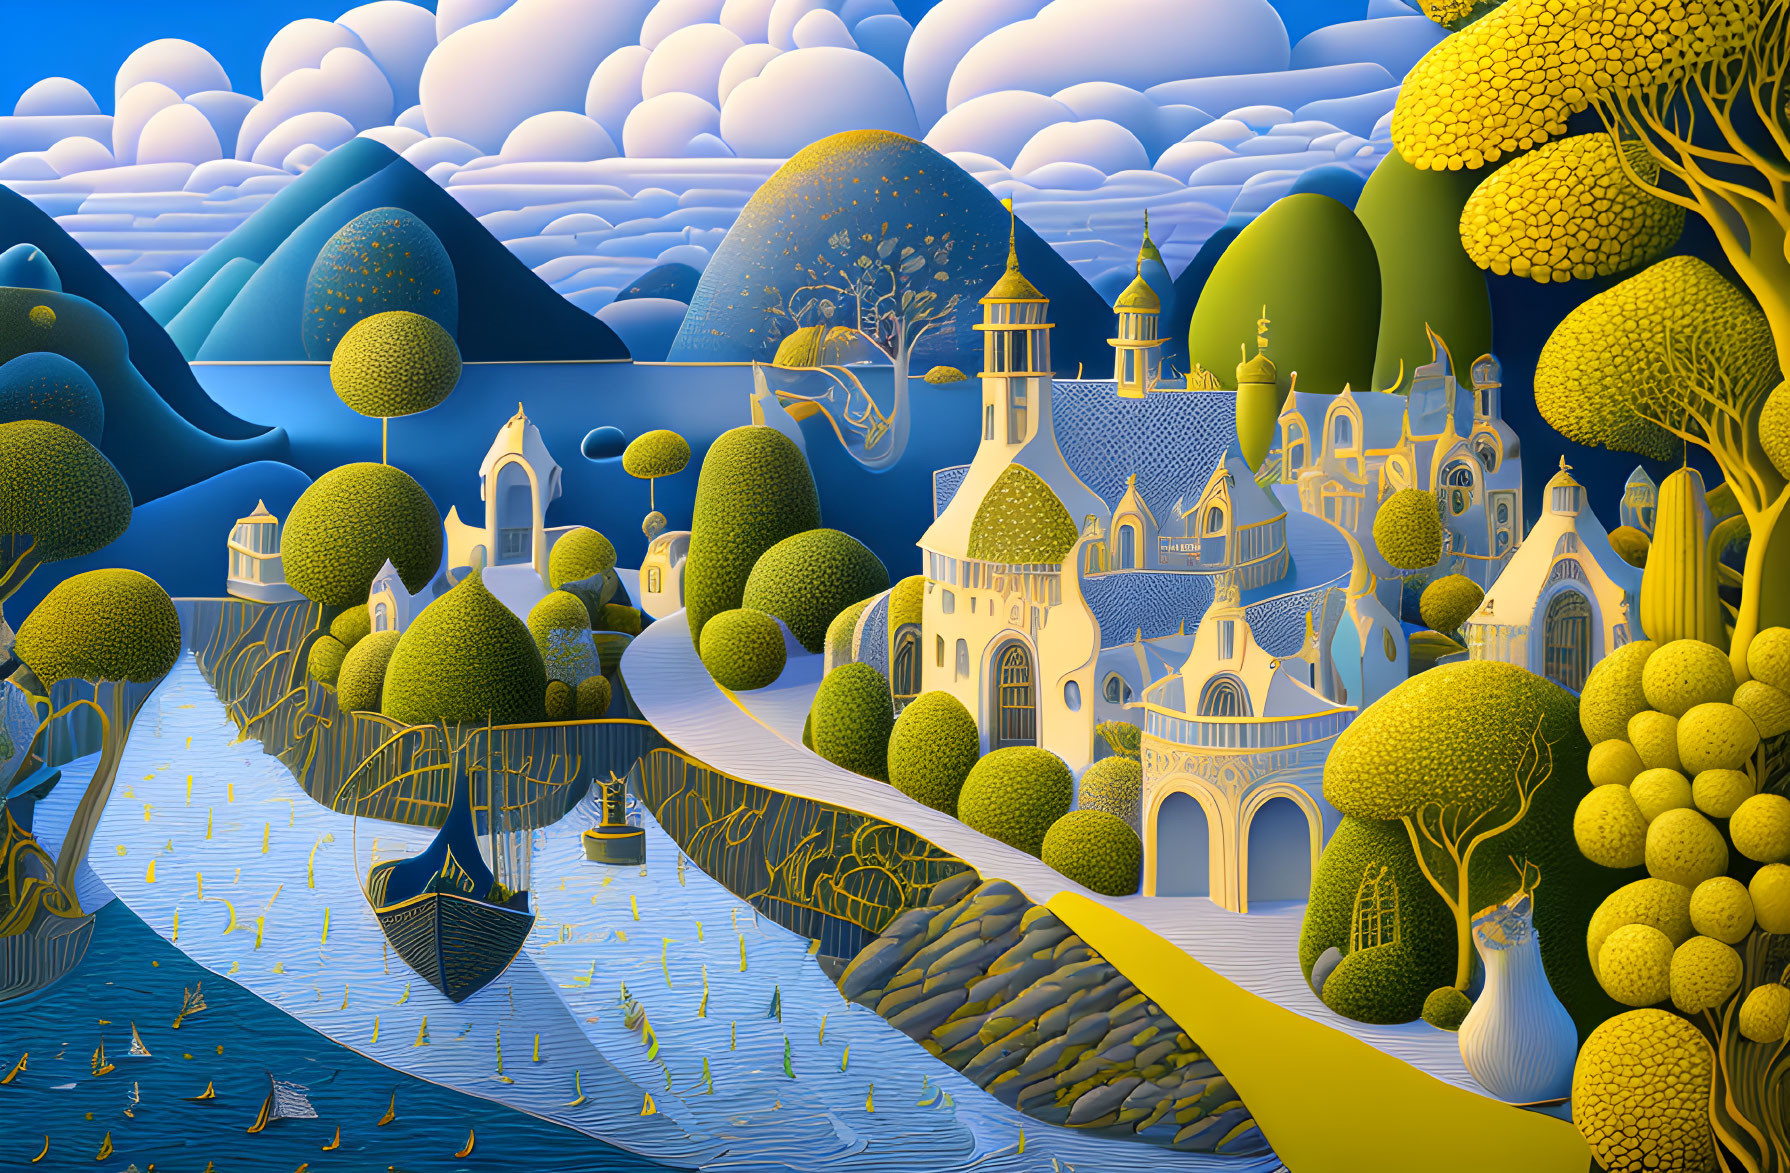 Detailed surreal landscape with stylized castle, whimsical trees, boats on river, fluffy clouds